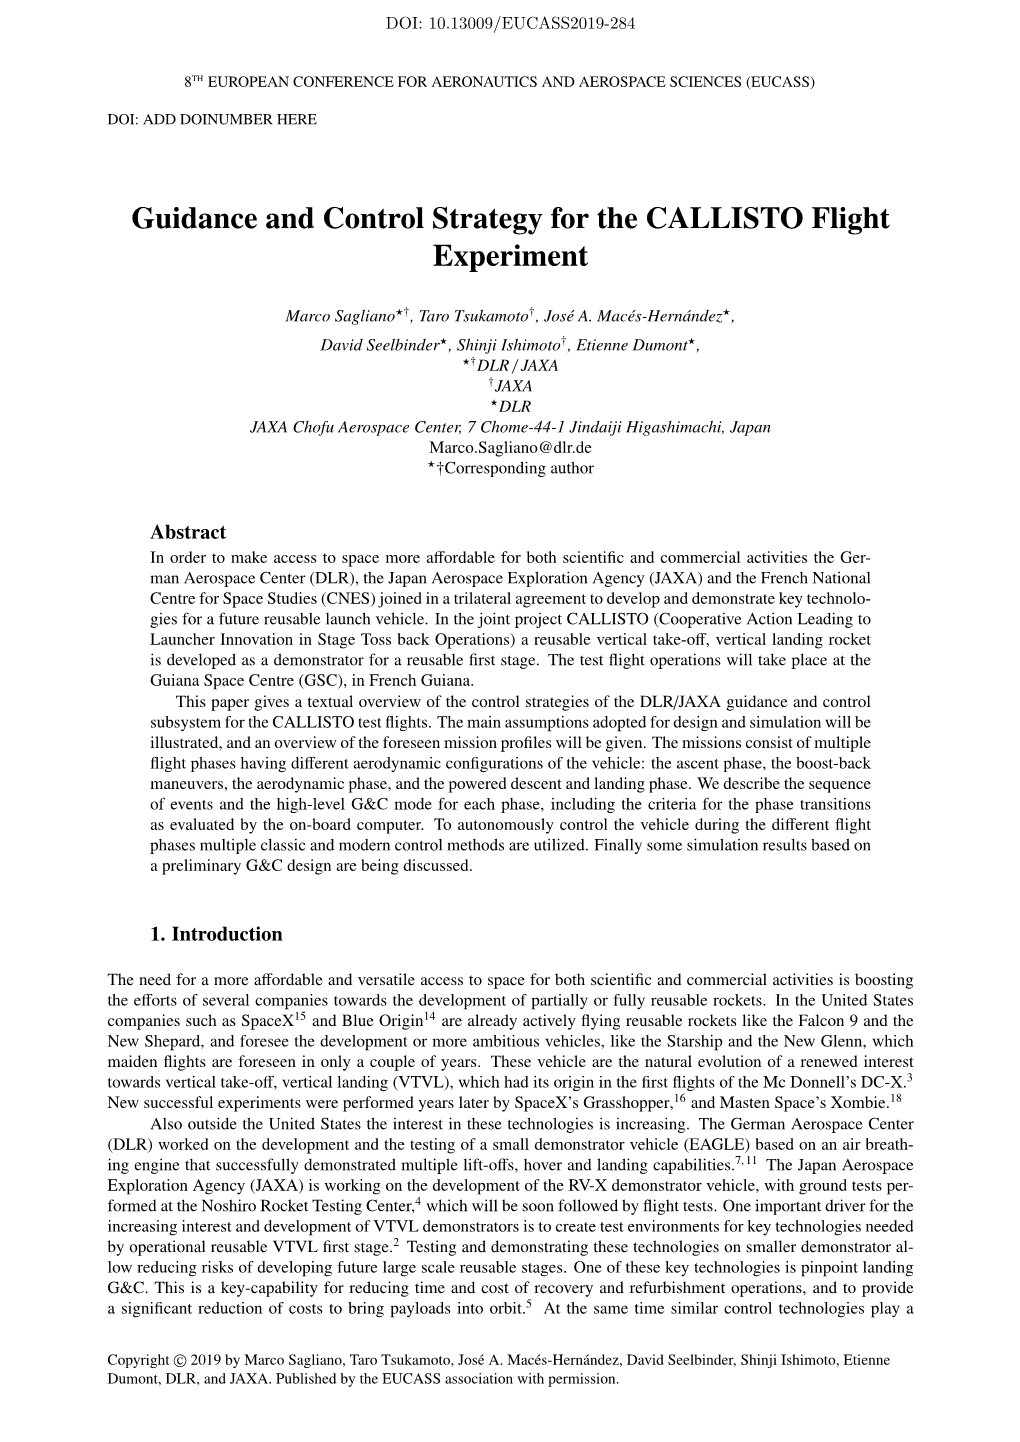 Guidance and Control Strategy for the CALLISTO Flight Experiment